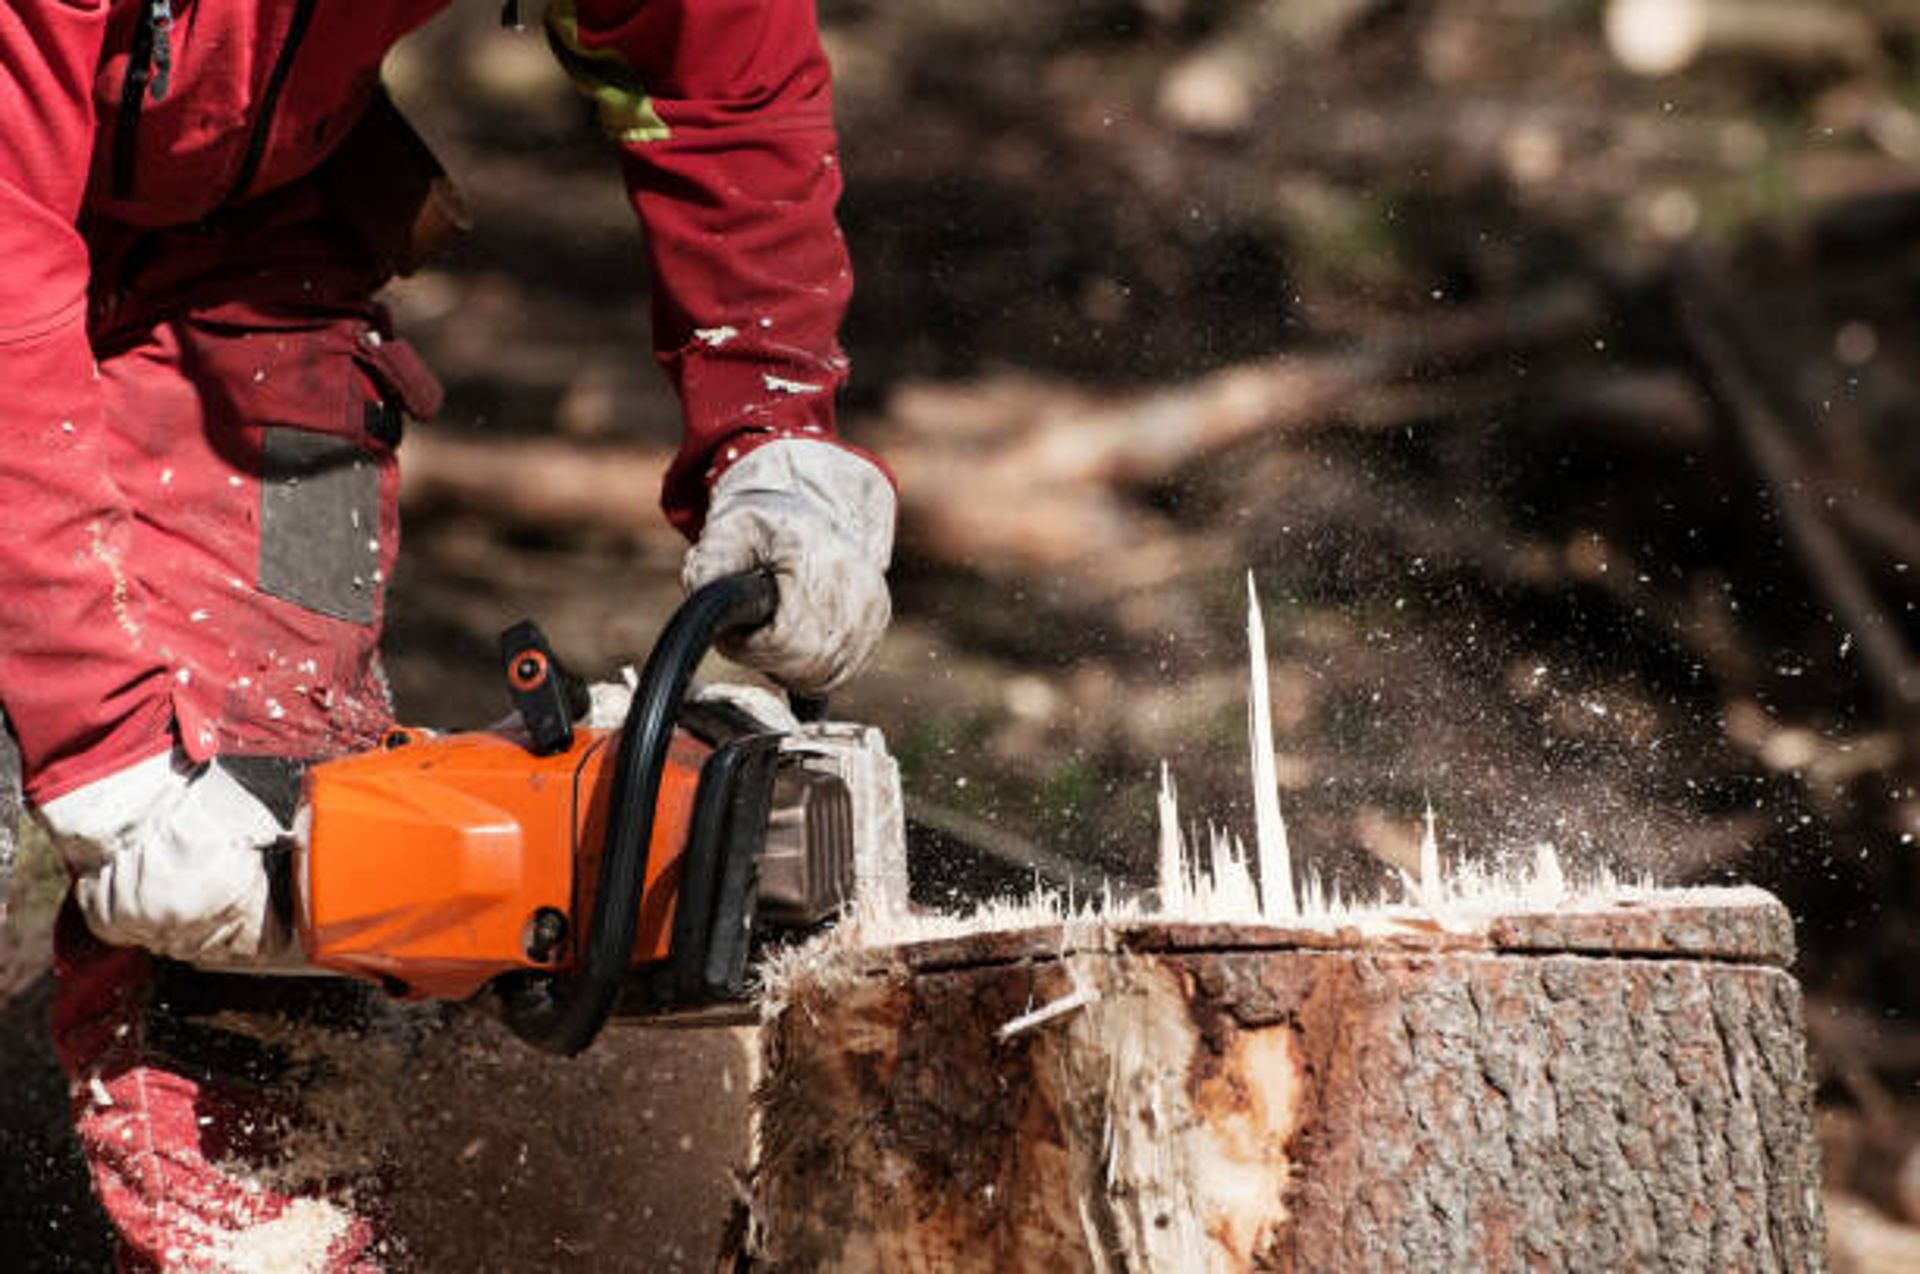 Tree Services for Transforming Landscaping & Tree Service in Bowling Green, KY